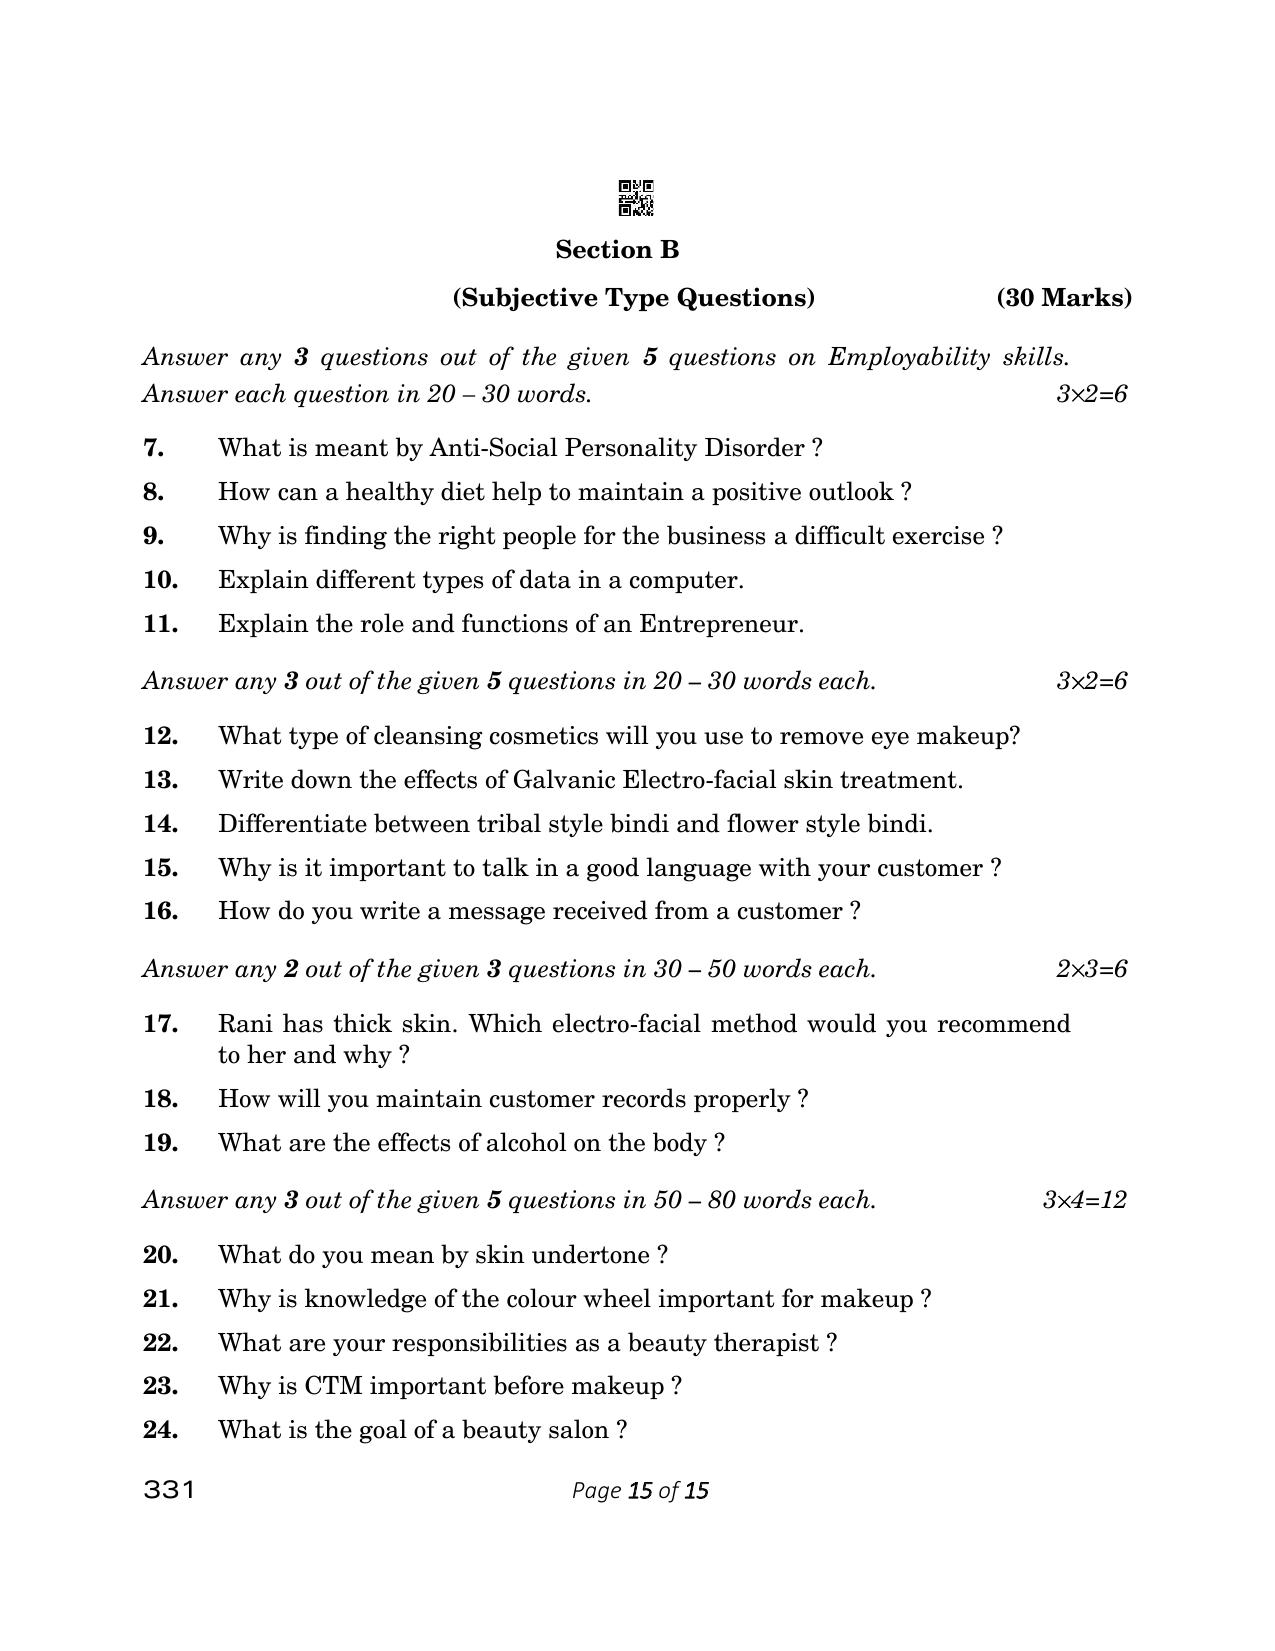 CBSE Class 12 331 Beauty And Wellness 2023 Question Paper - Page 15